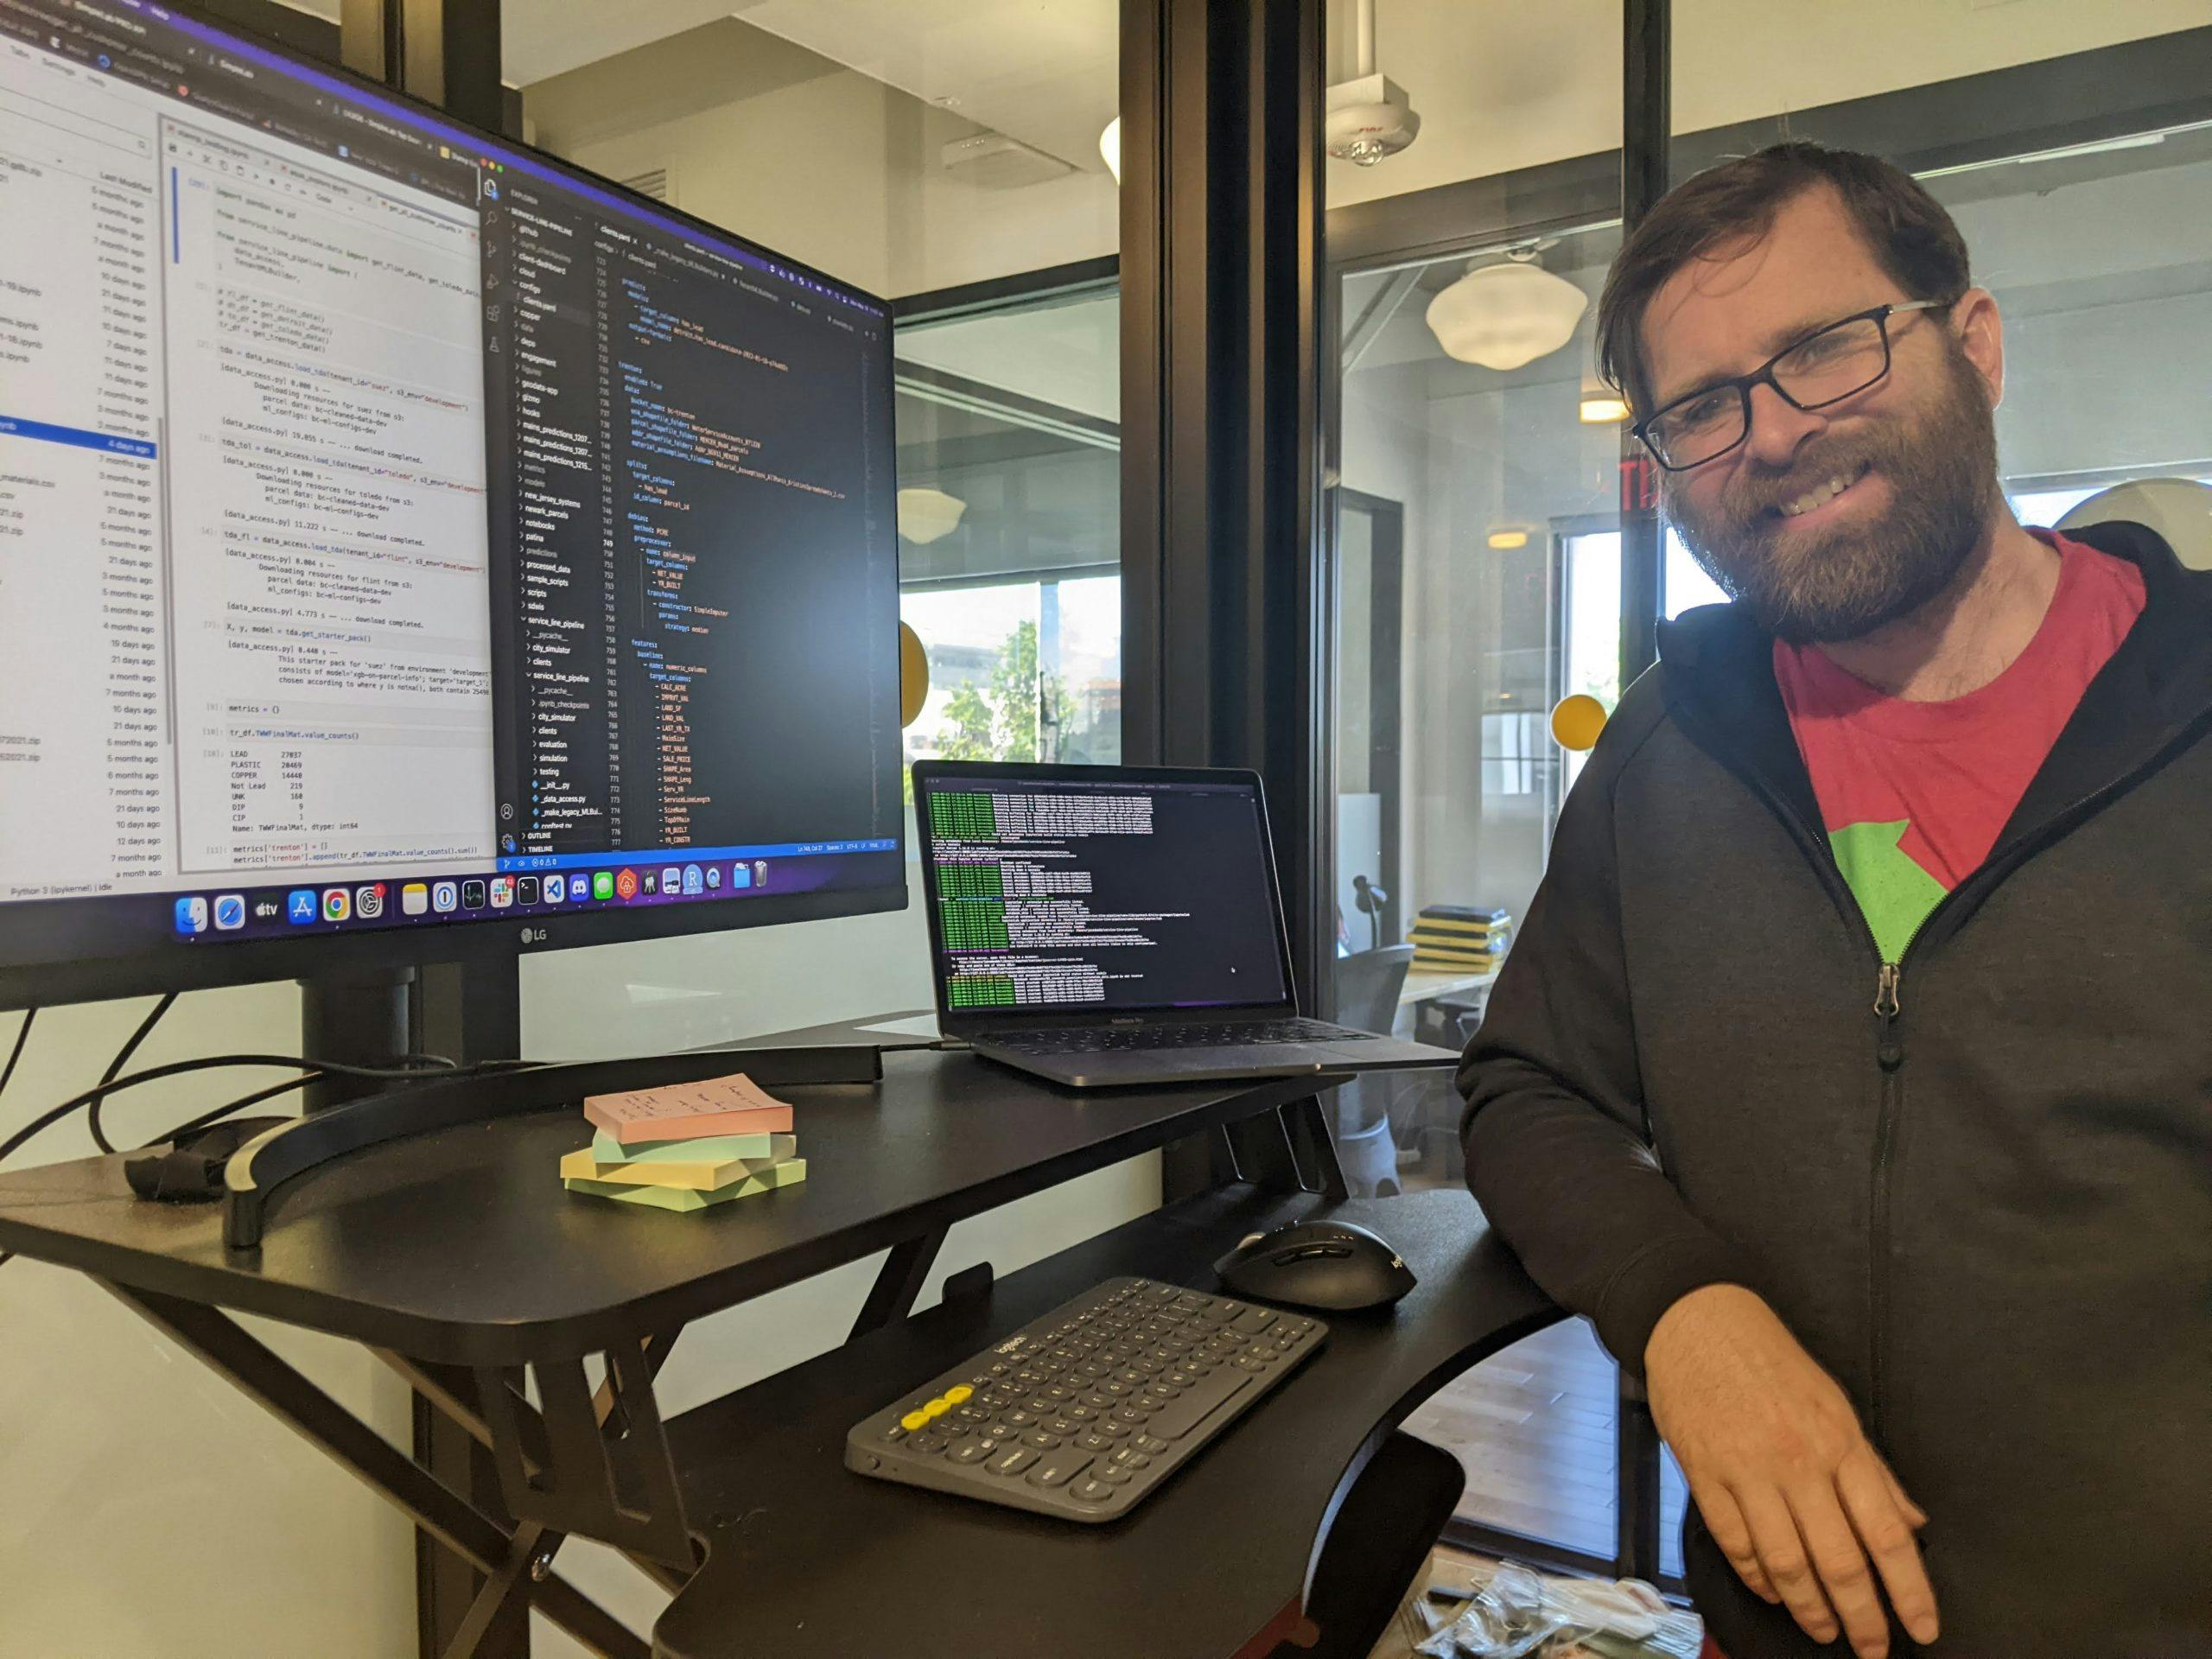 BlueConduit's head of data science, Jared Webb, poses next to his work station.